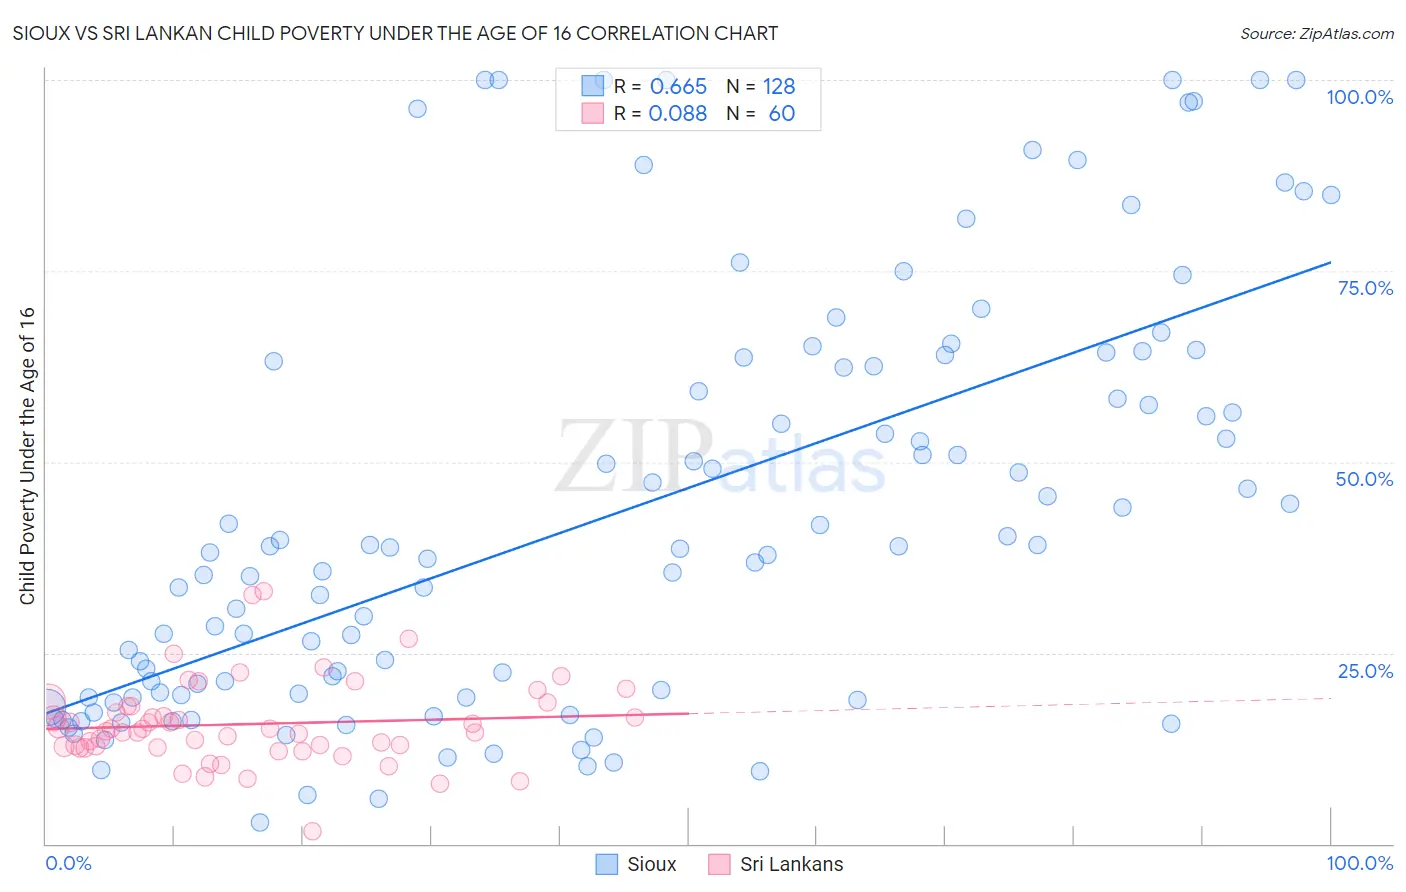 Sioux vs Sri Lankan Child Poverty Under the Age of 16